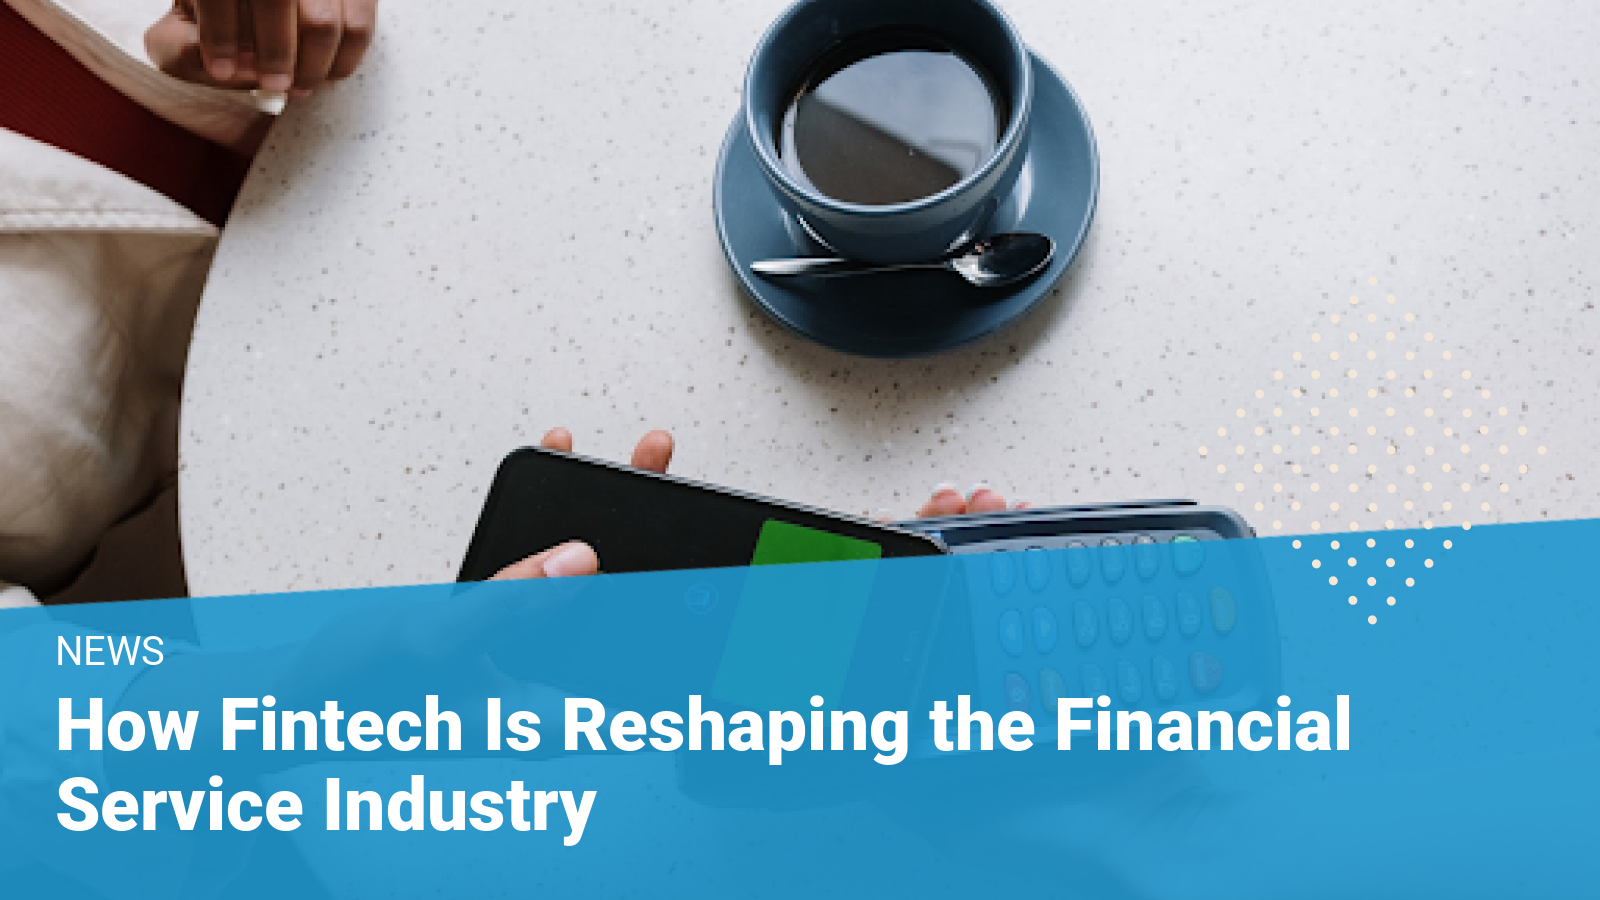 Fintech Is Reshaping the Financial Service Industry